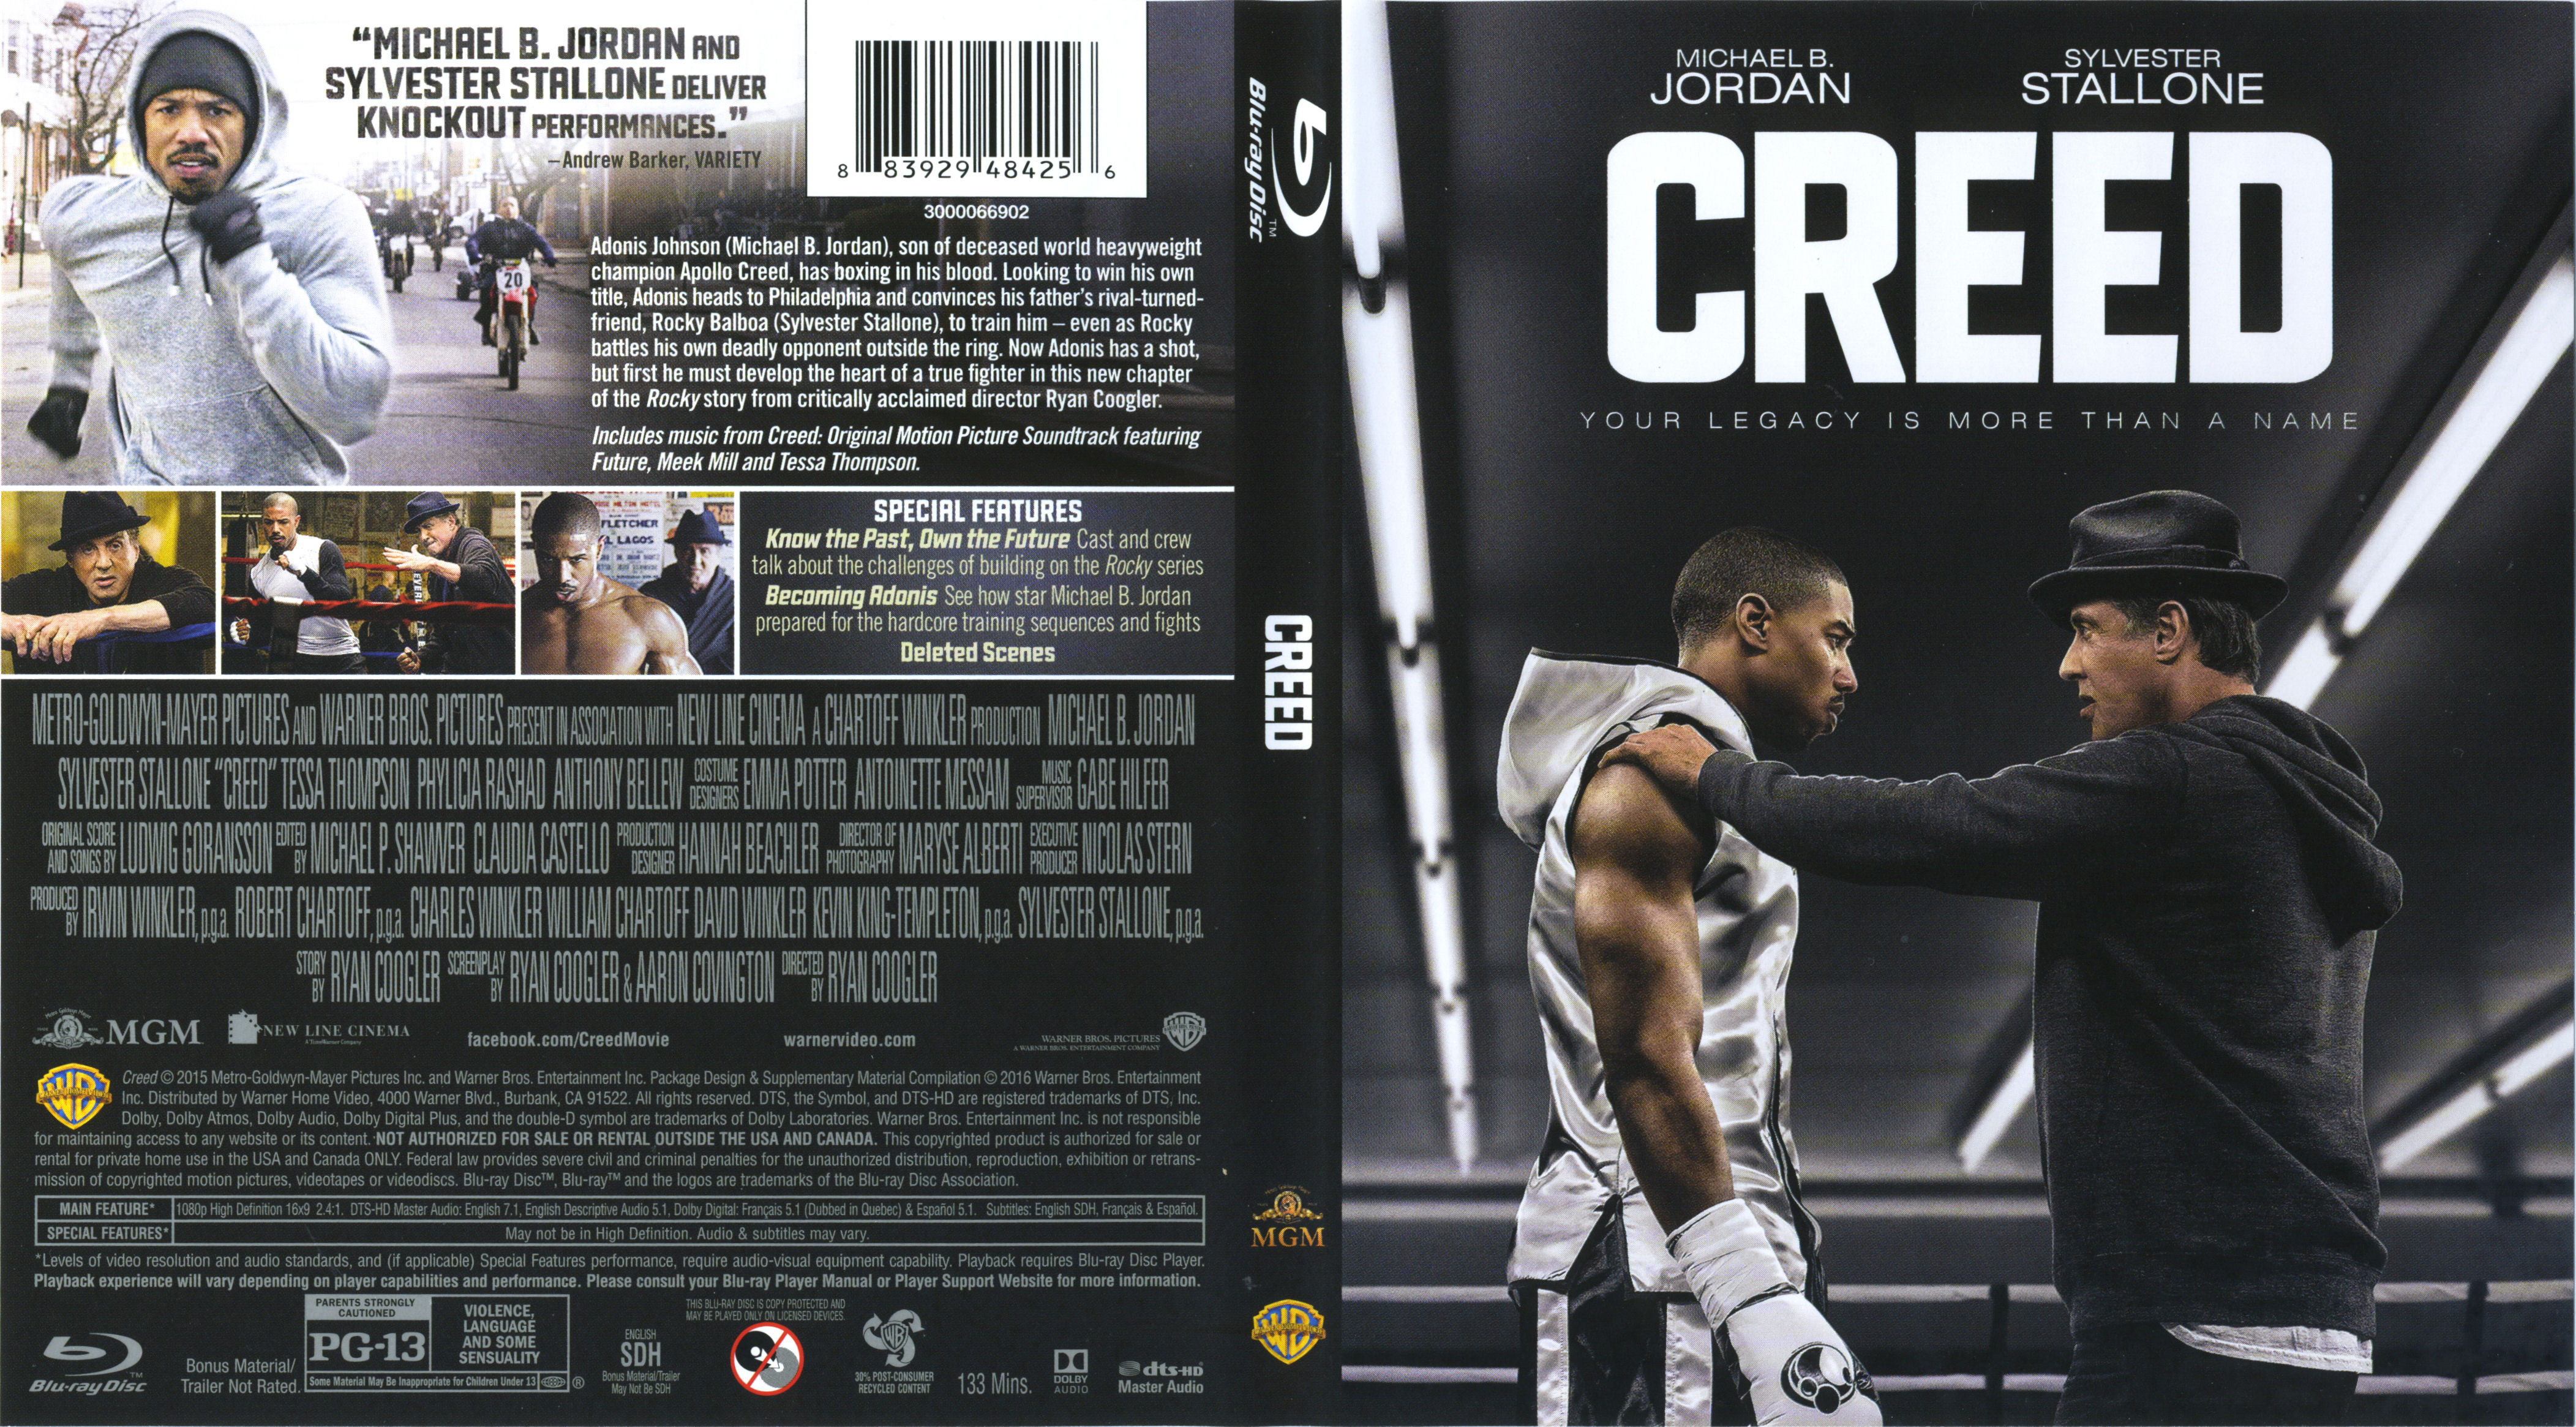 Jaquette DVD Creed Zone 1 (BLU-RAY)